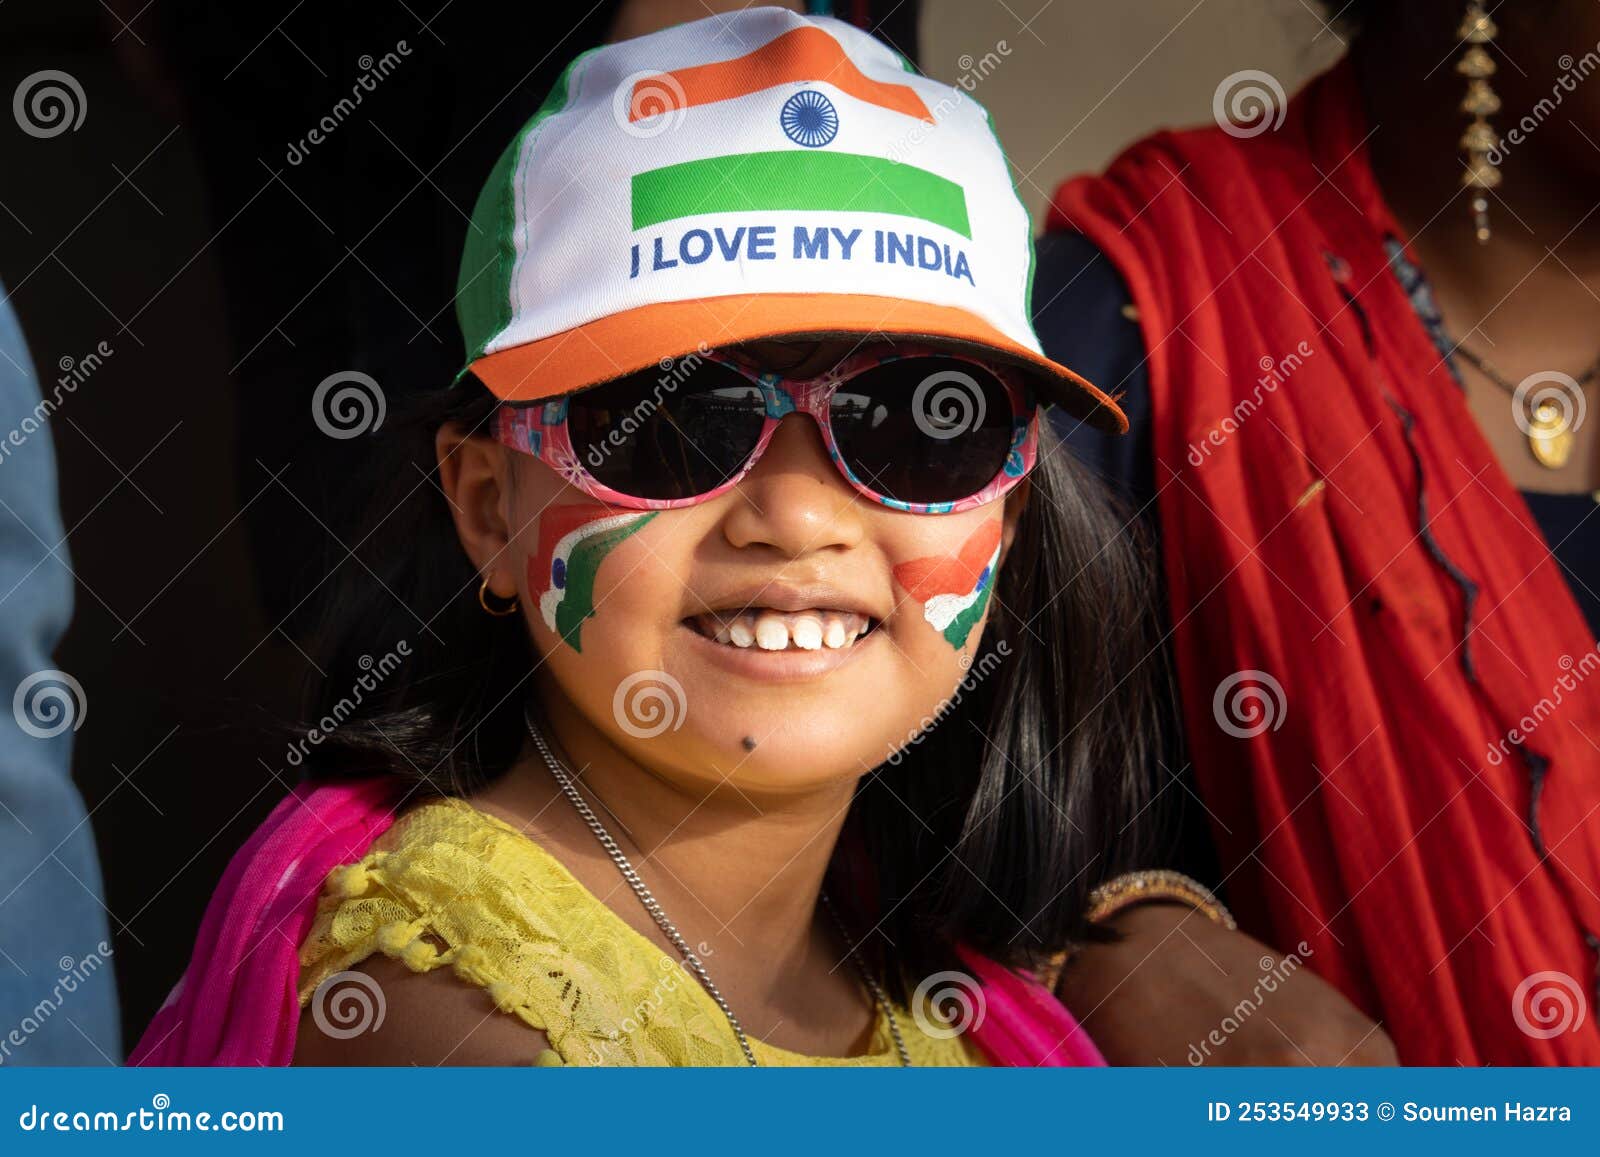 Indian independence day stock image. Image of india - 253549933